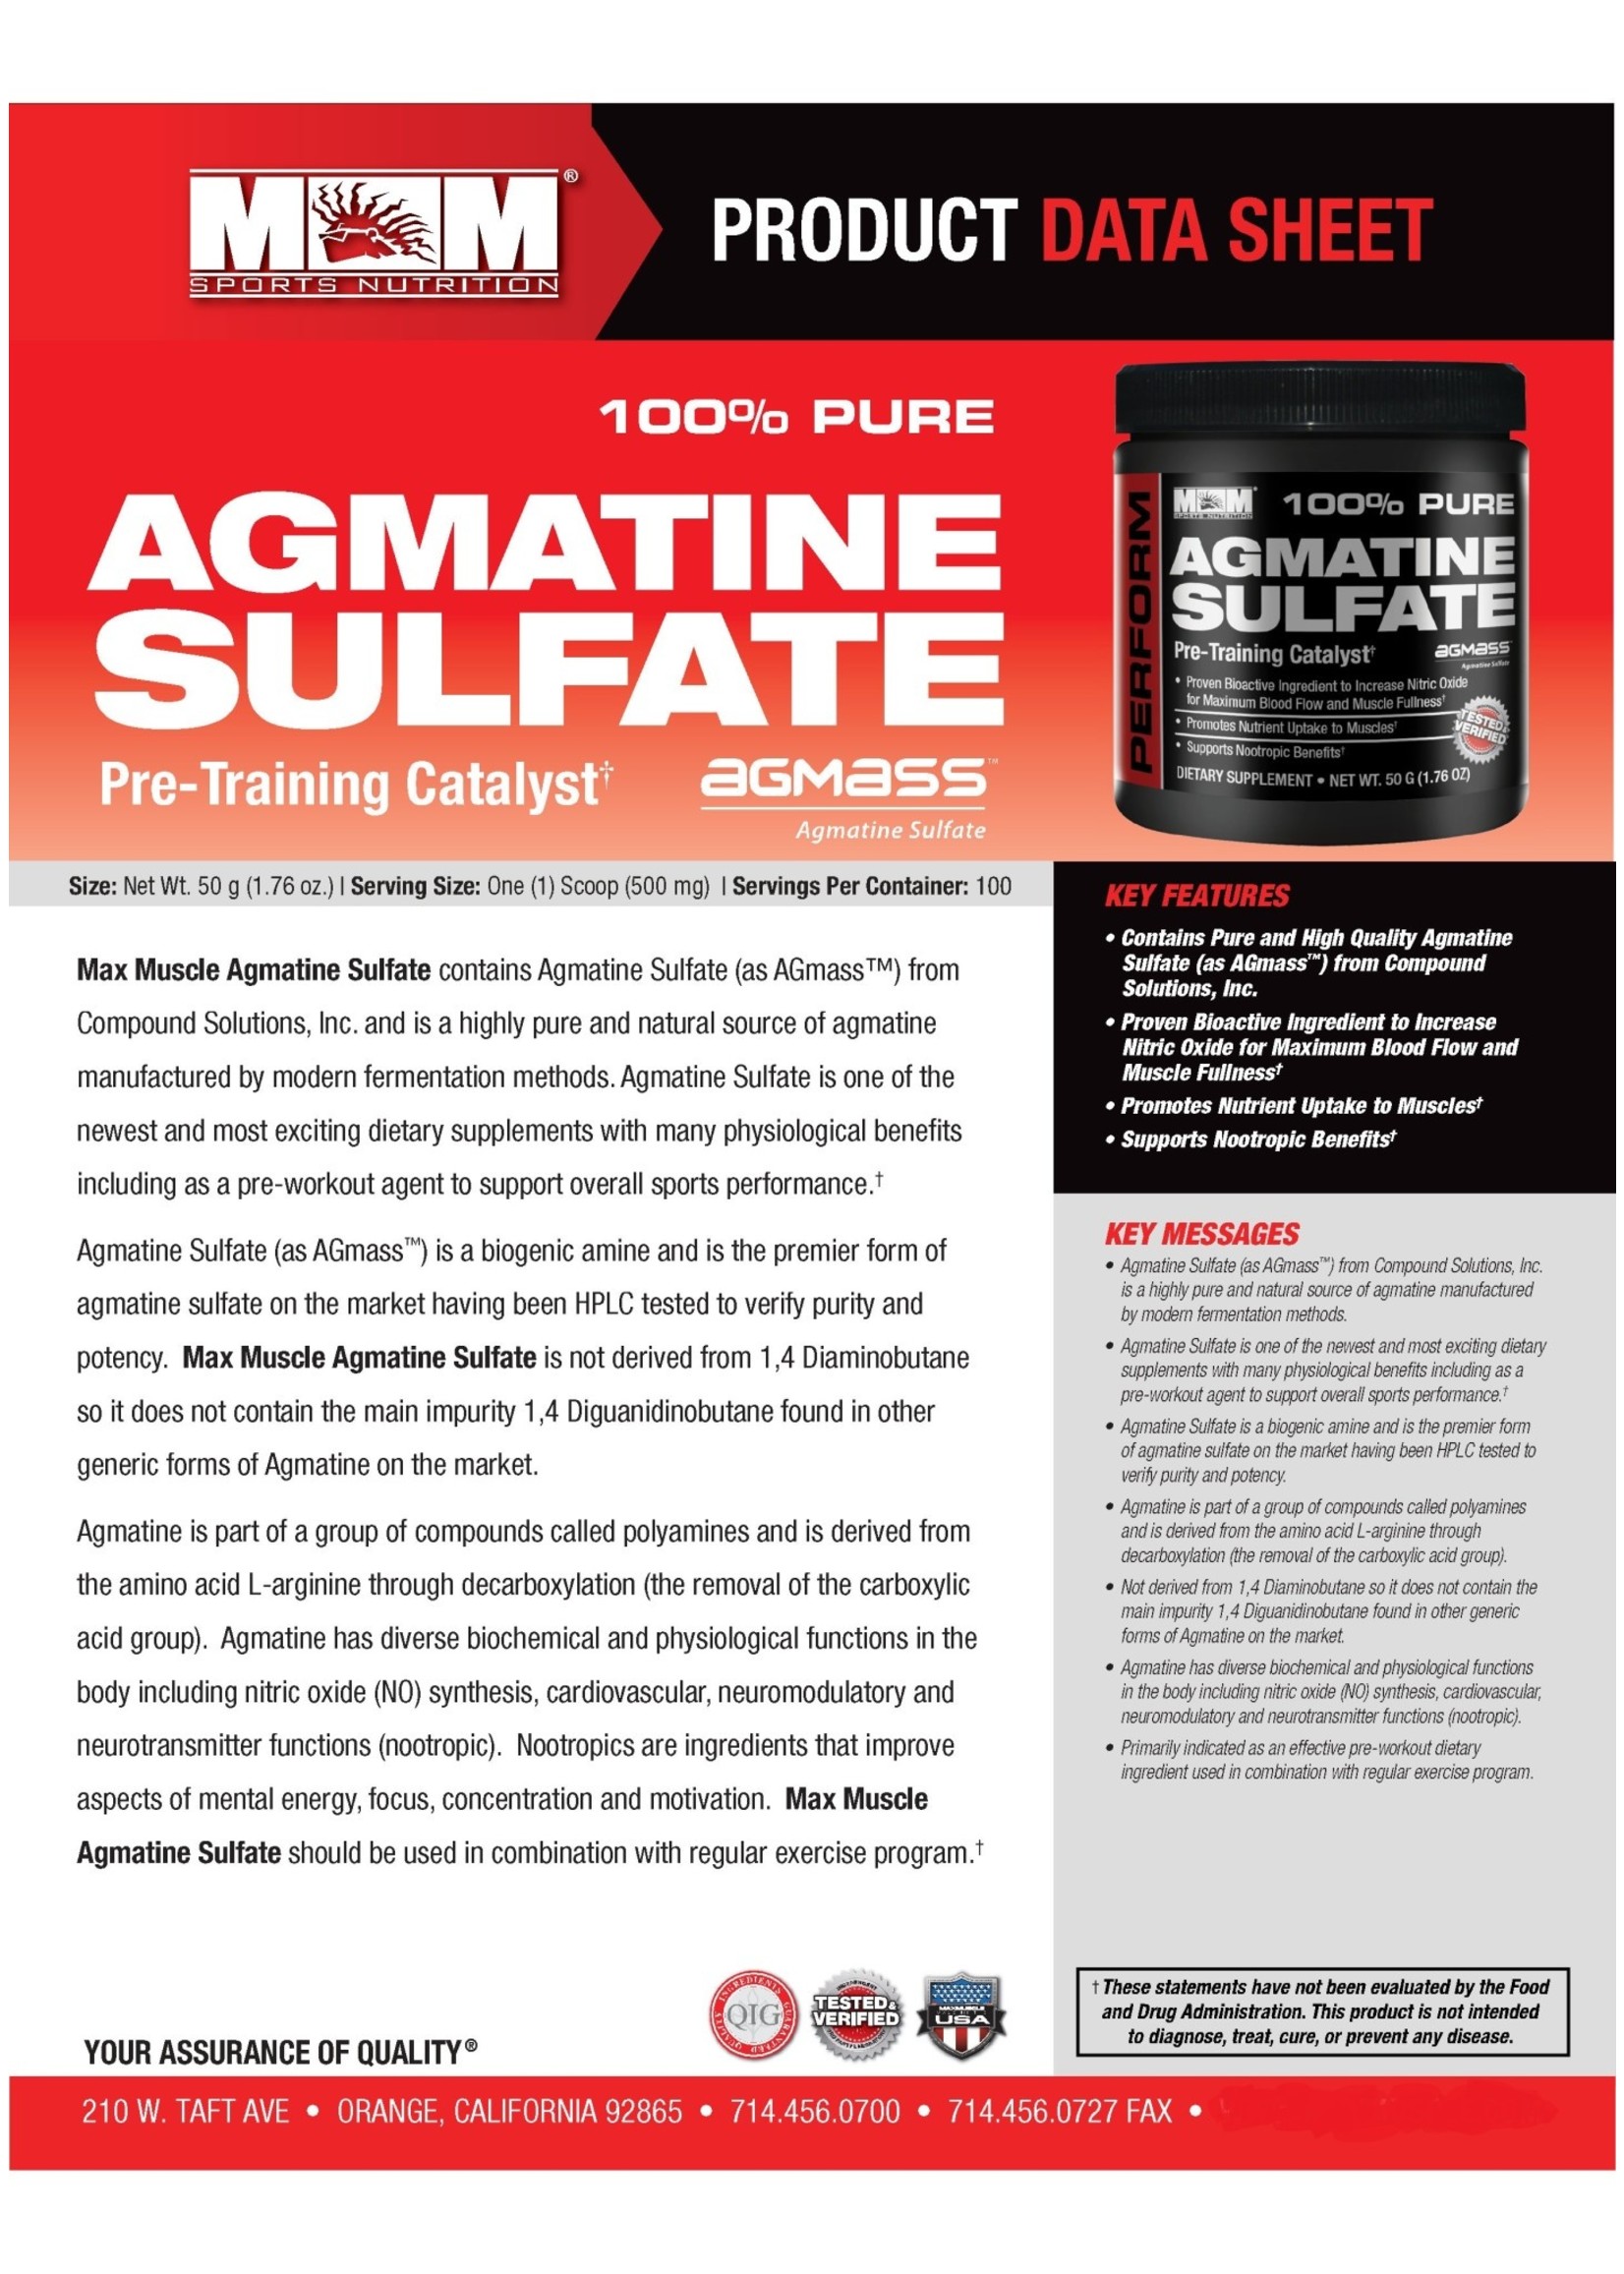 Max Muscle Agmatine Sulfate